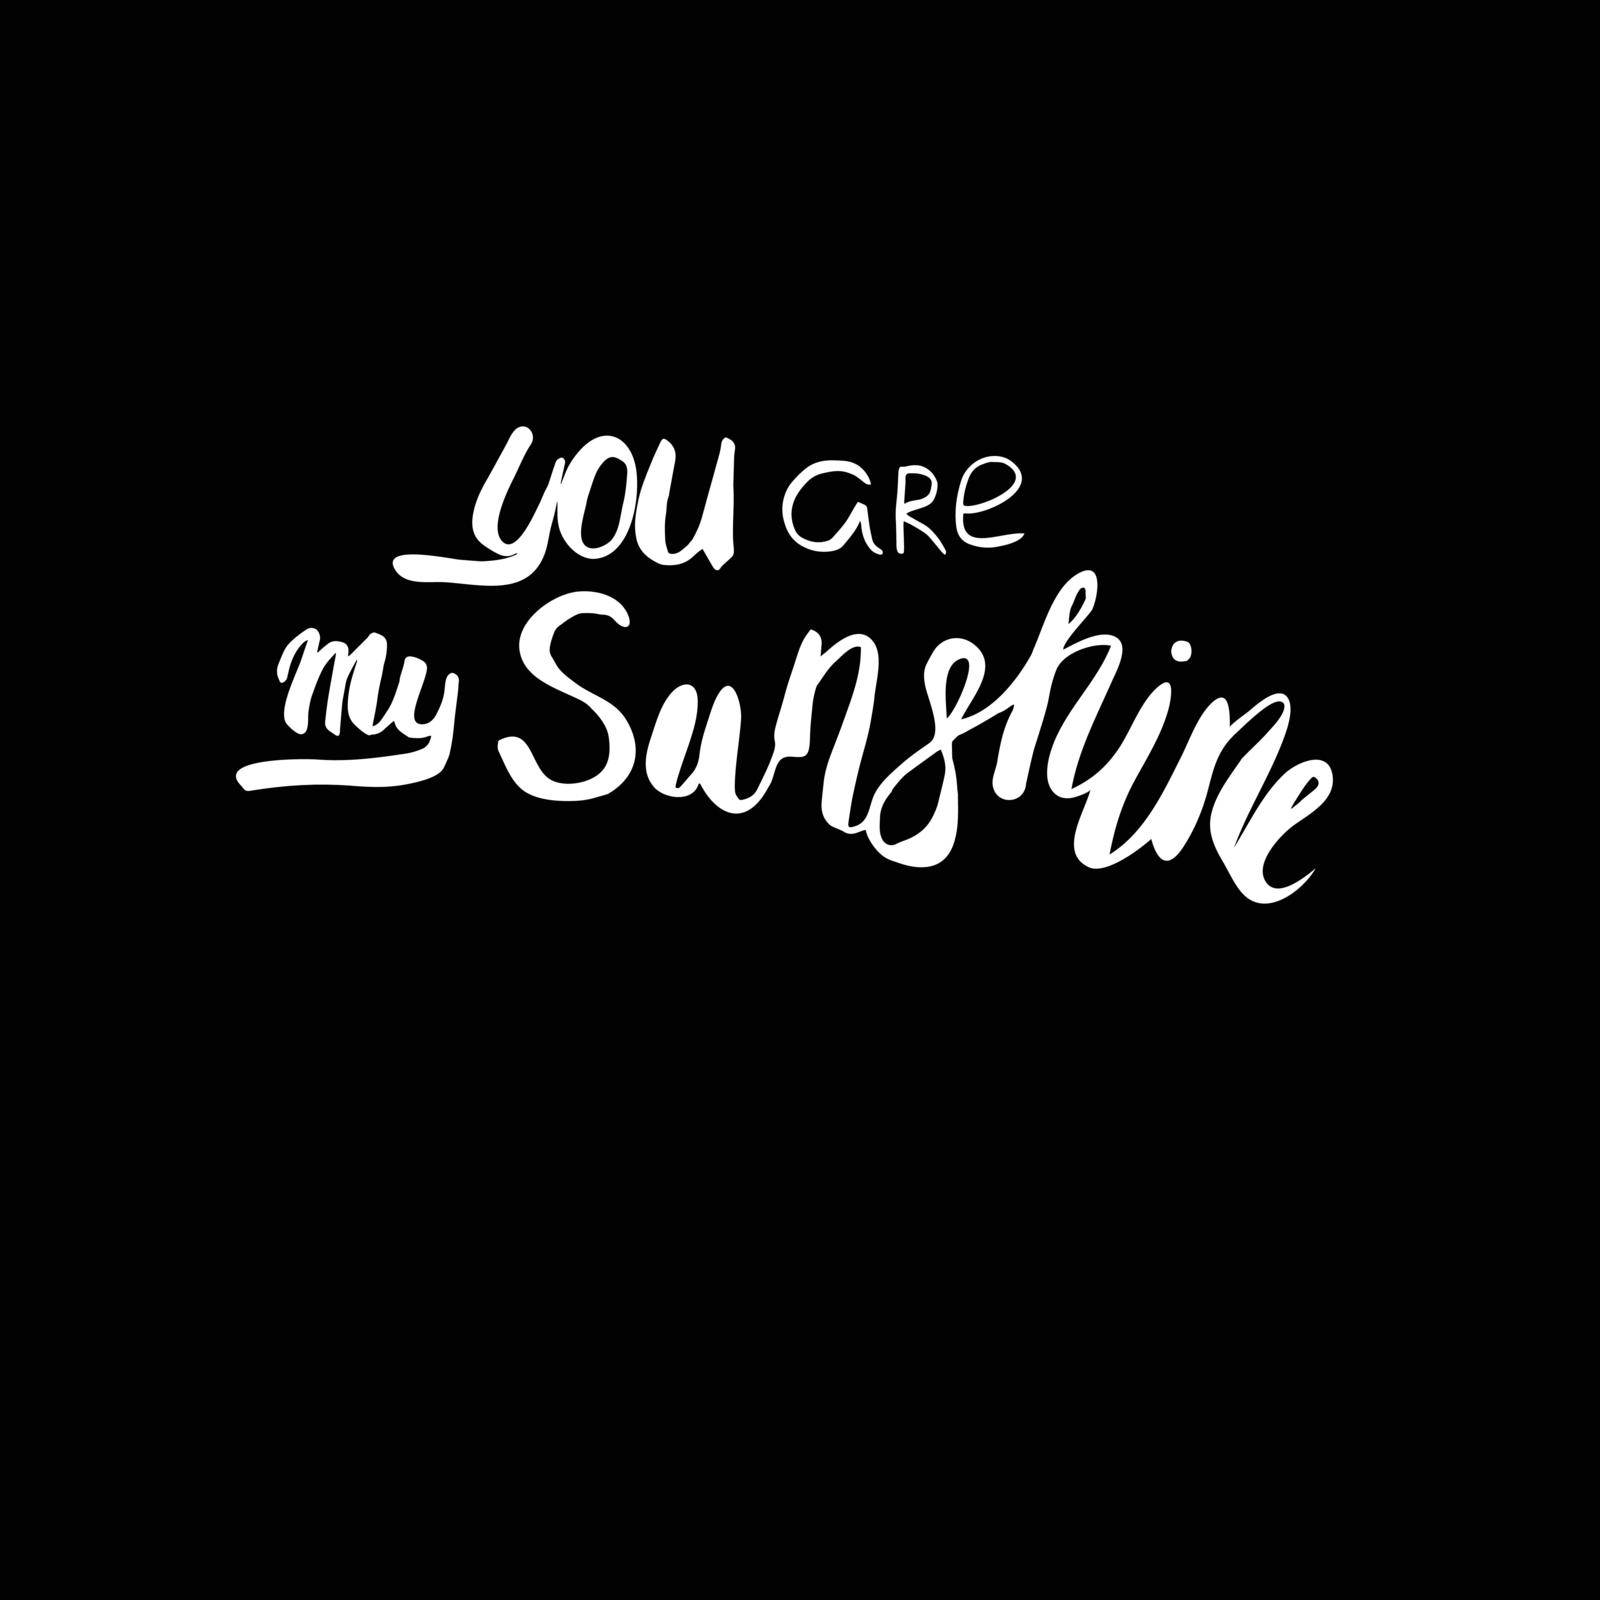 Motivational quote in vector for poster and cards. You are my sunshine